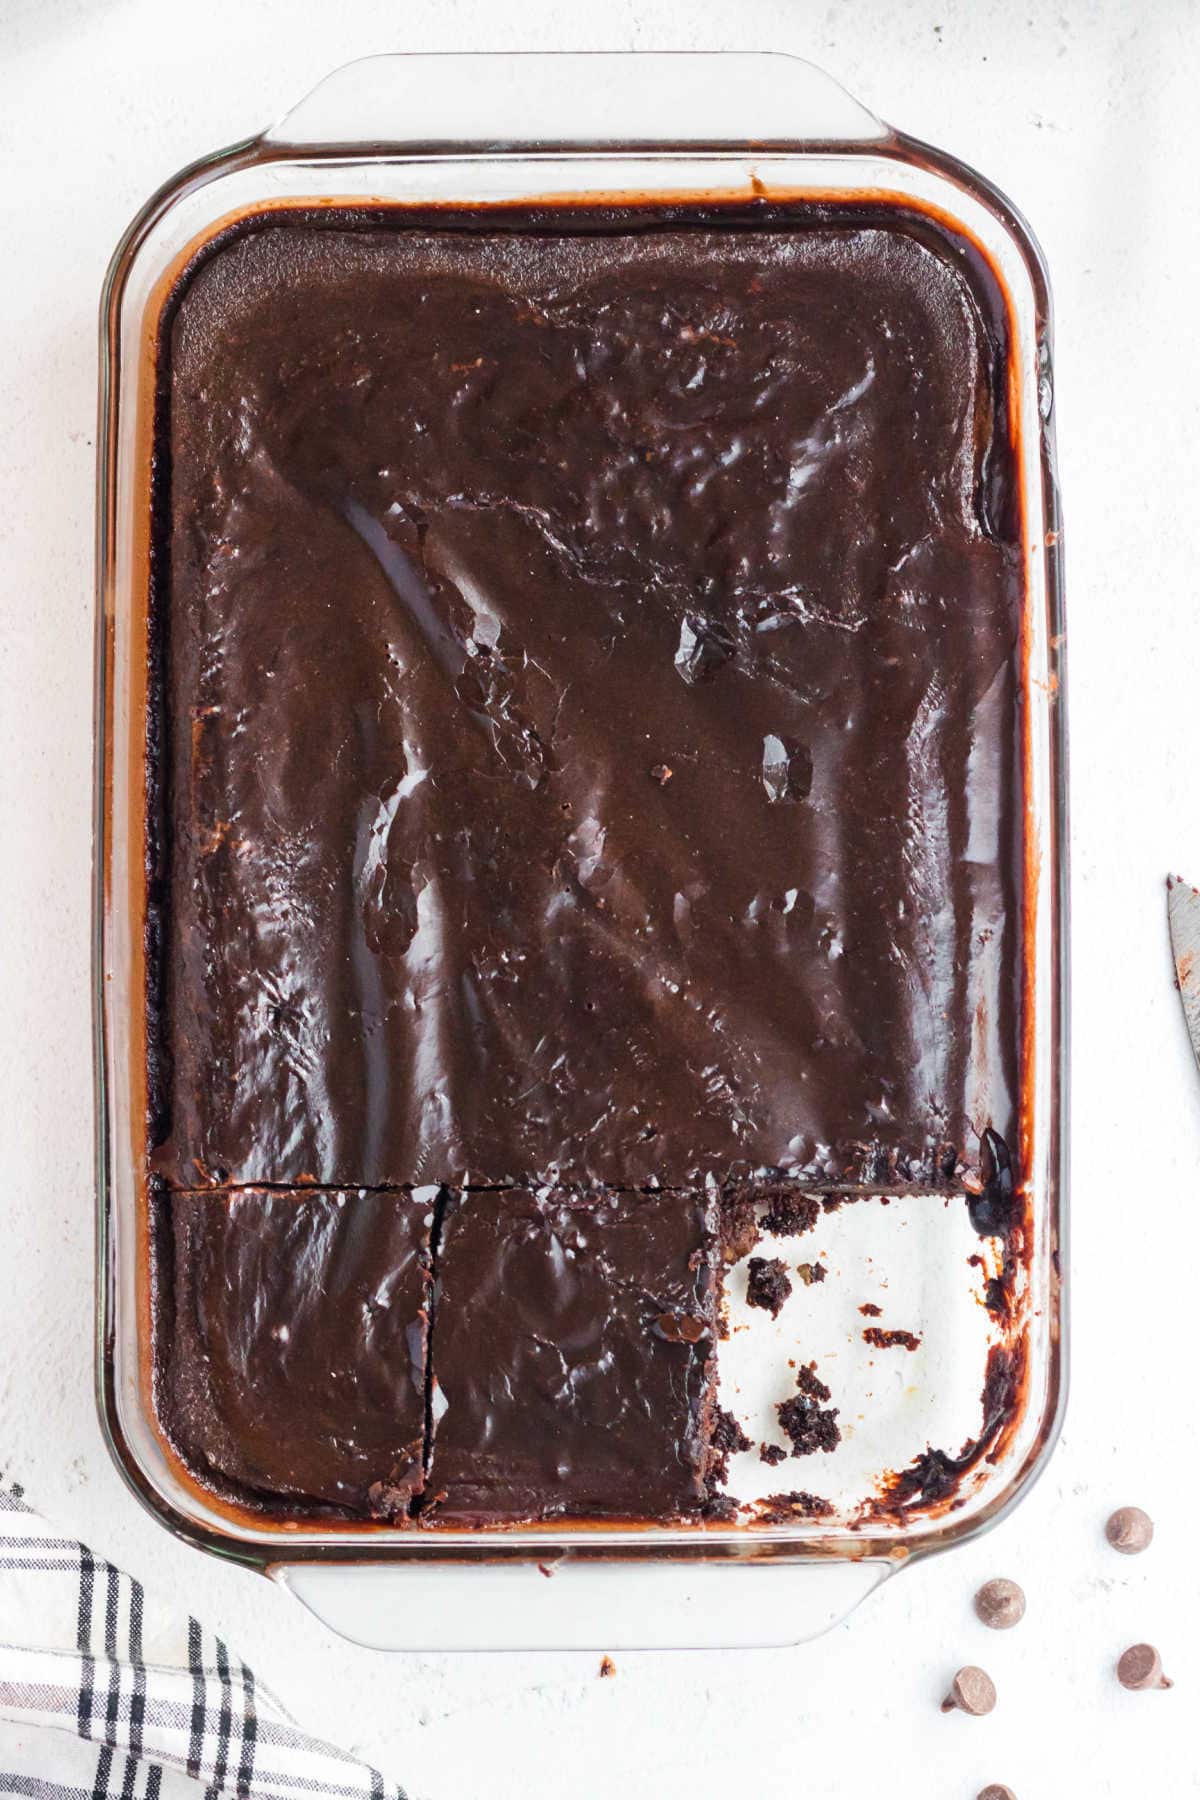 Overhead view of chocolate cake with a serving removed.